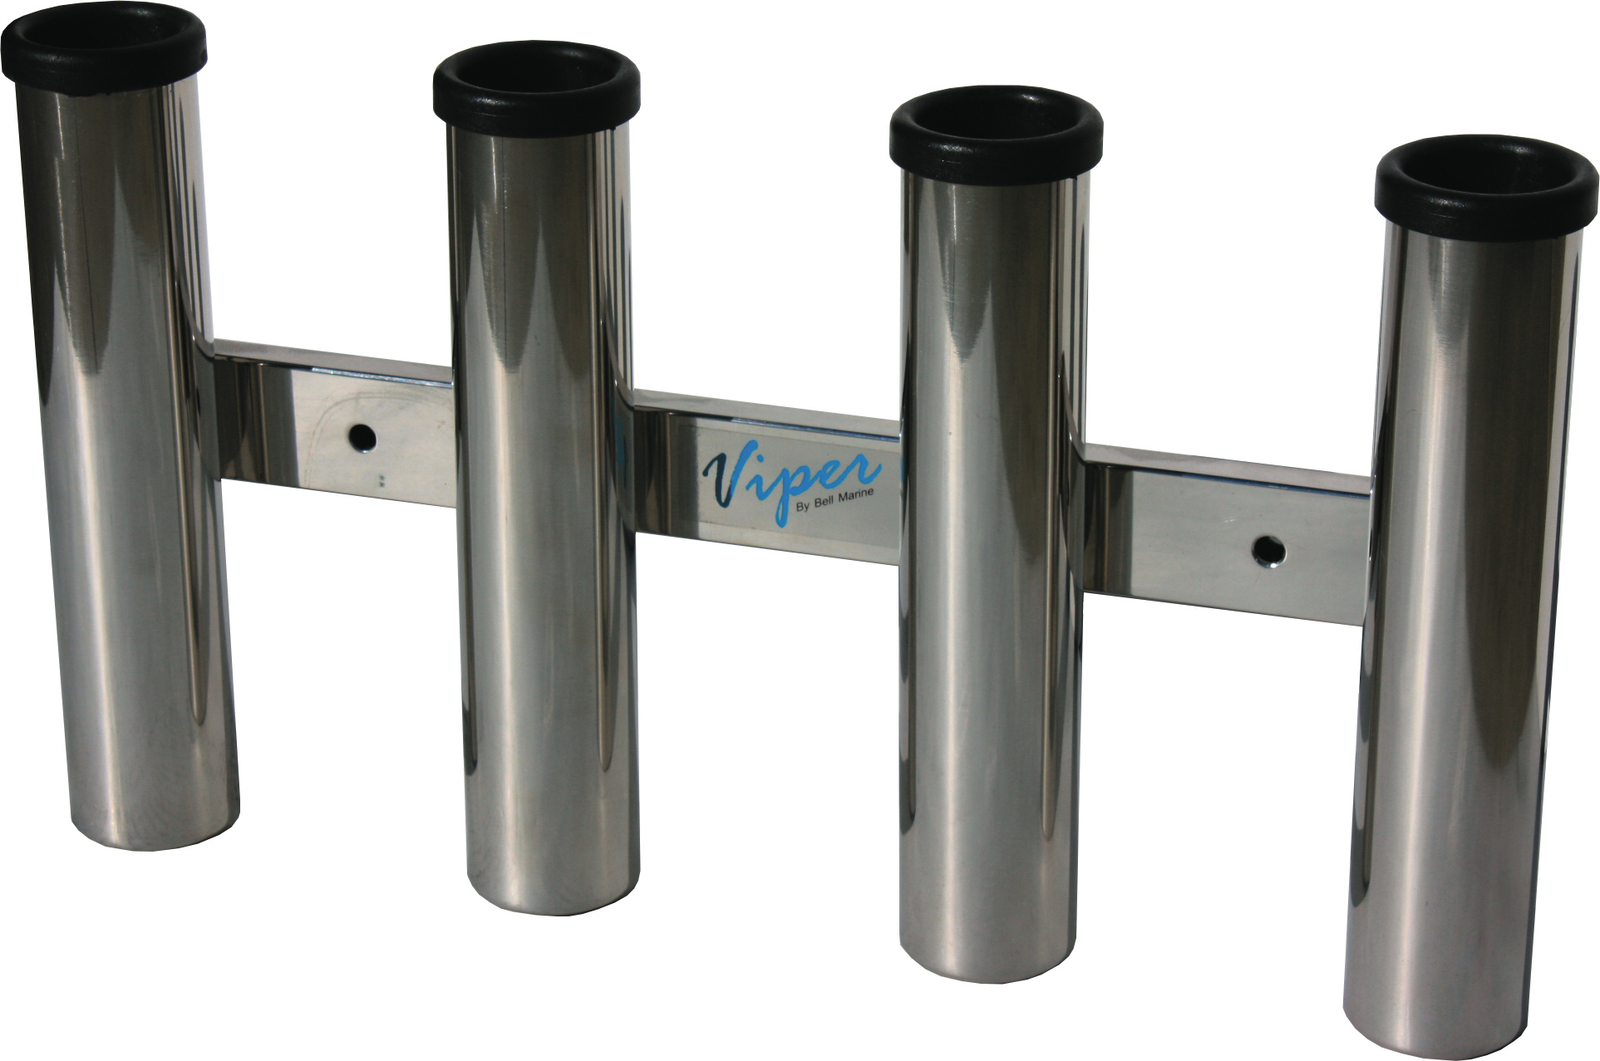 Viper Pro Stainless Steel Deluxe Four Rod Rack